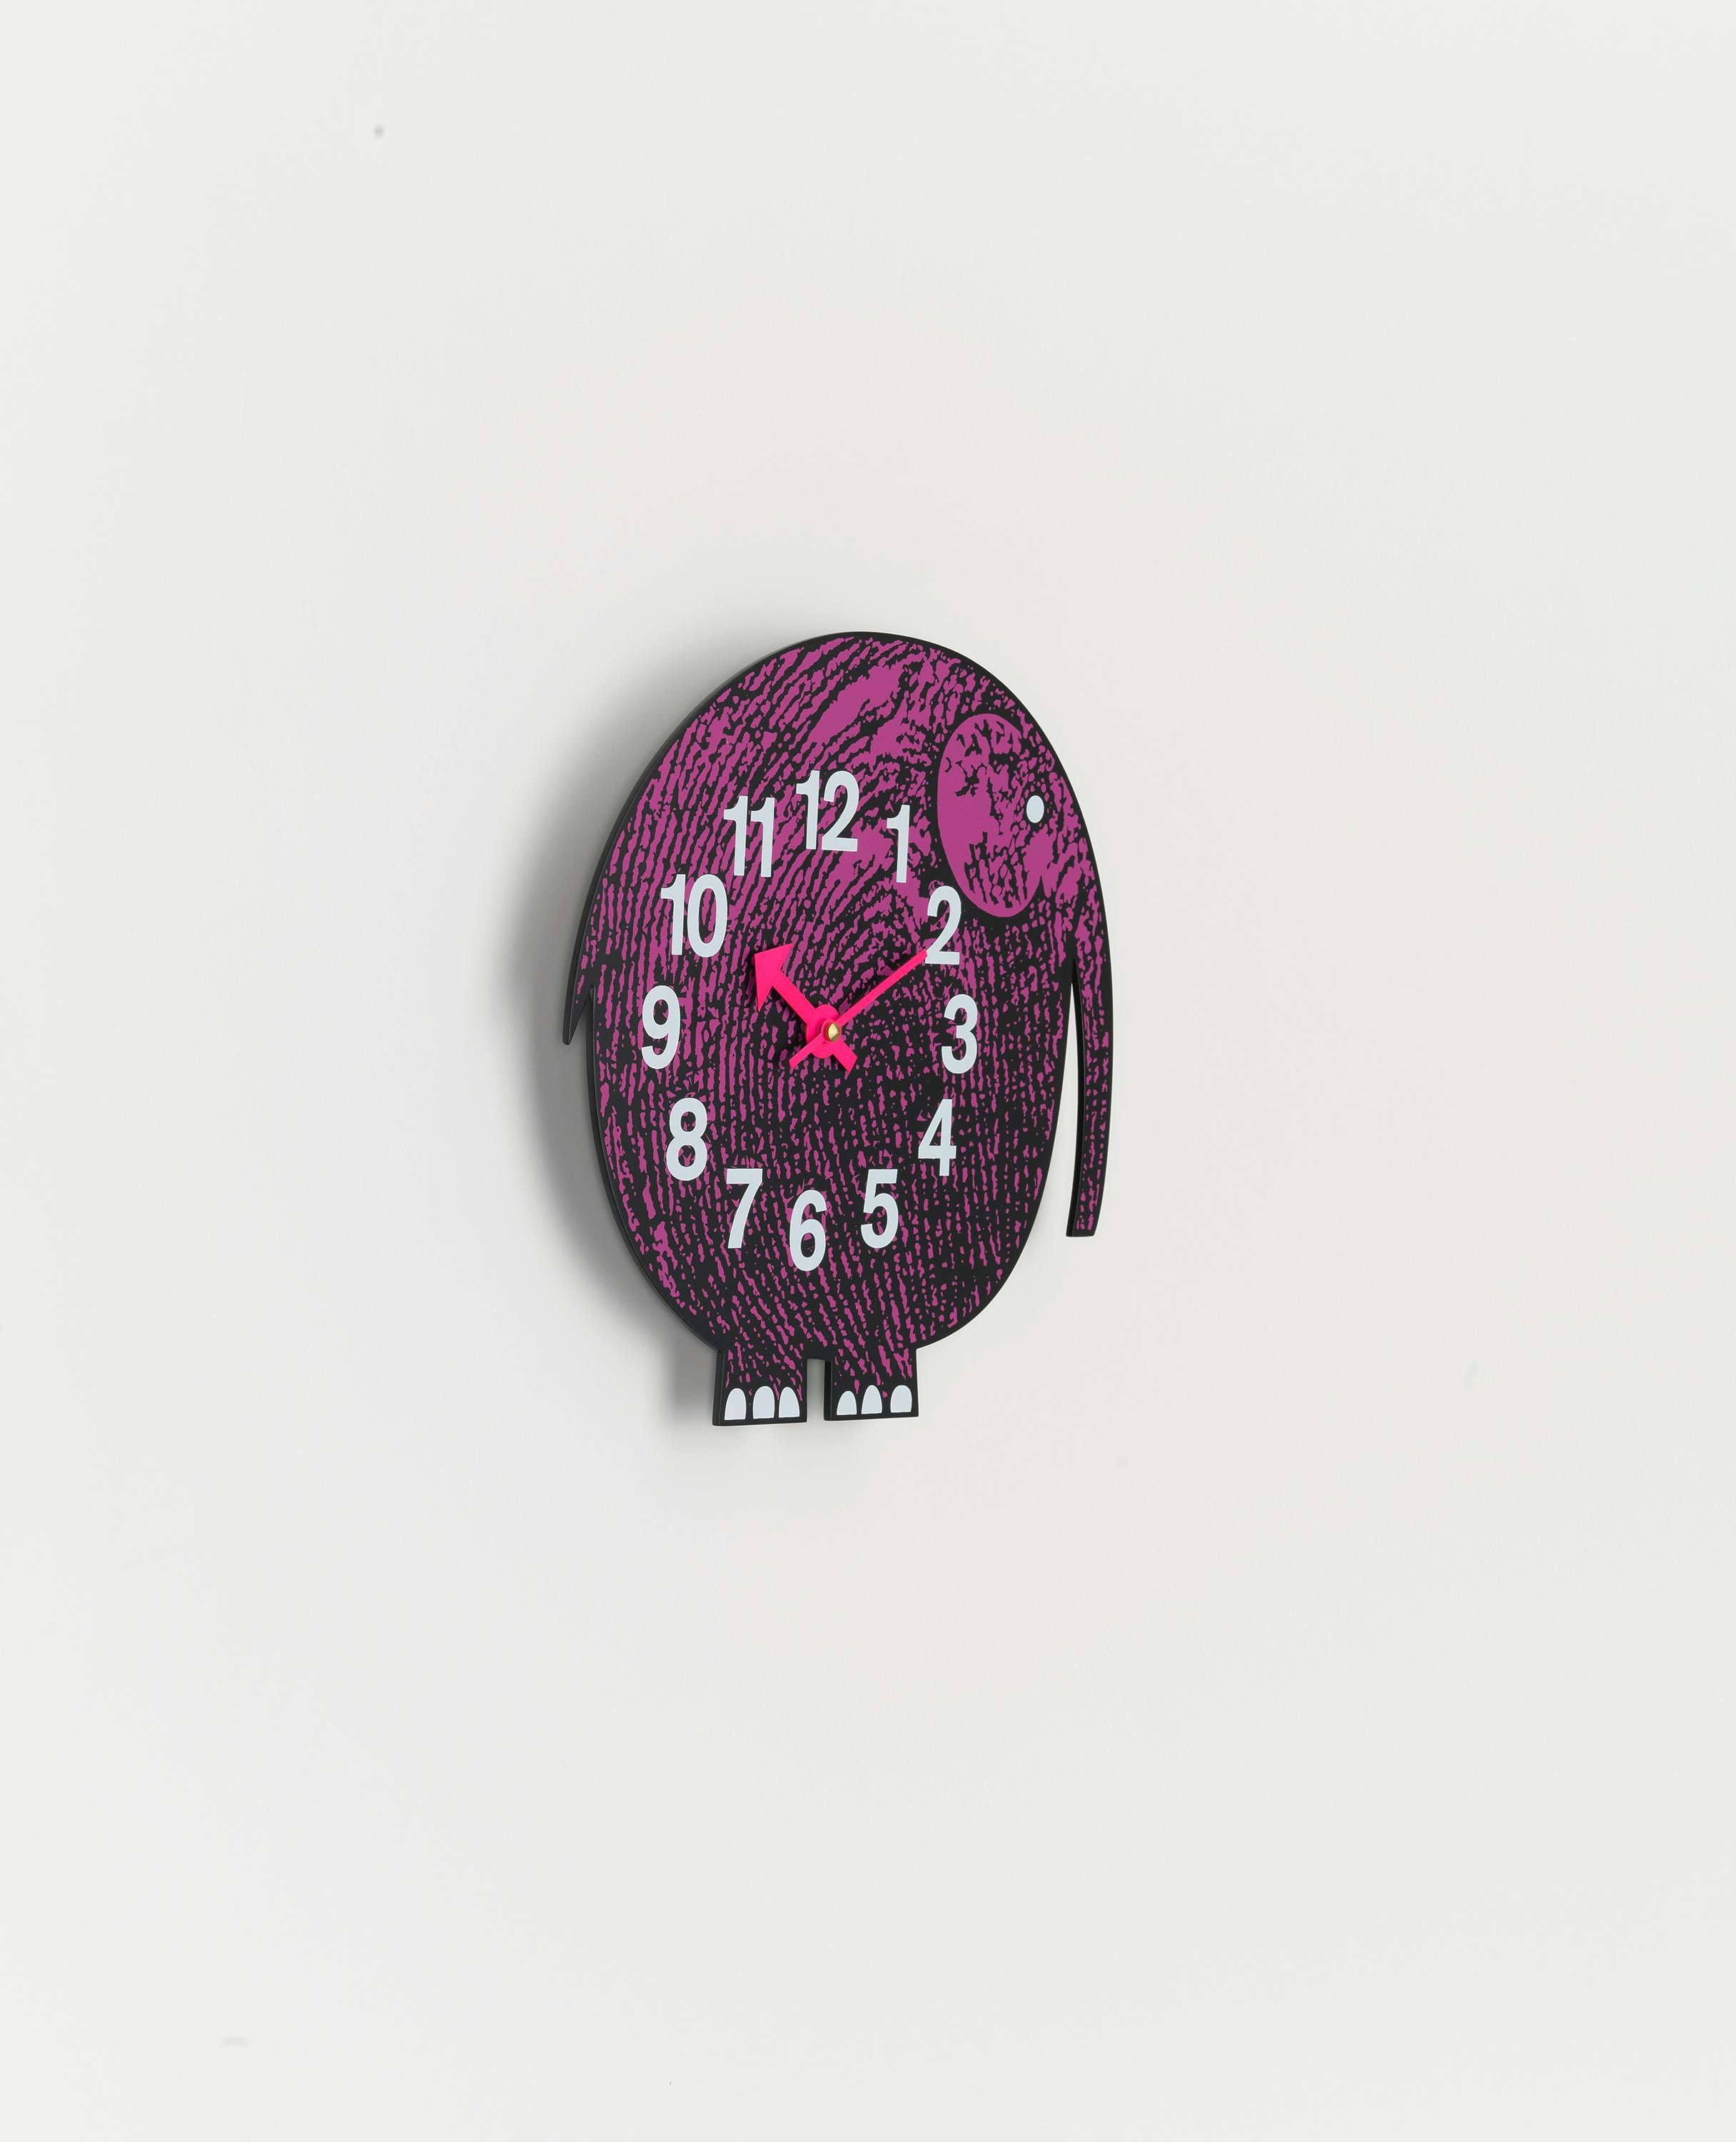 Swiss Vitra Zoo Timers Elihu the Elephant Wall Clock in Pink & Black by George Nelson For Sale